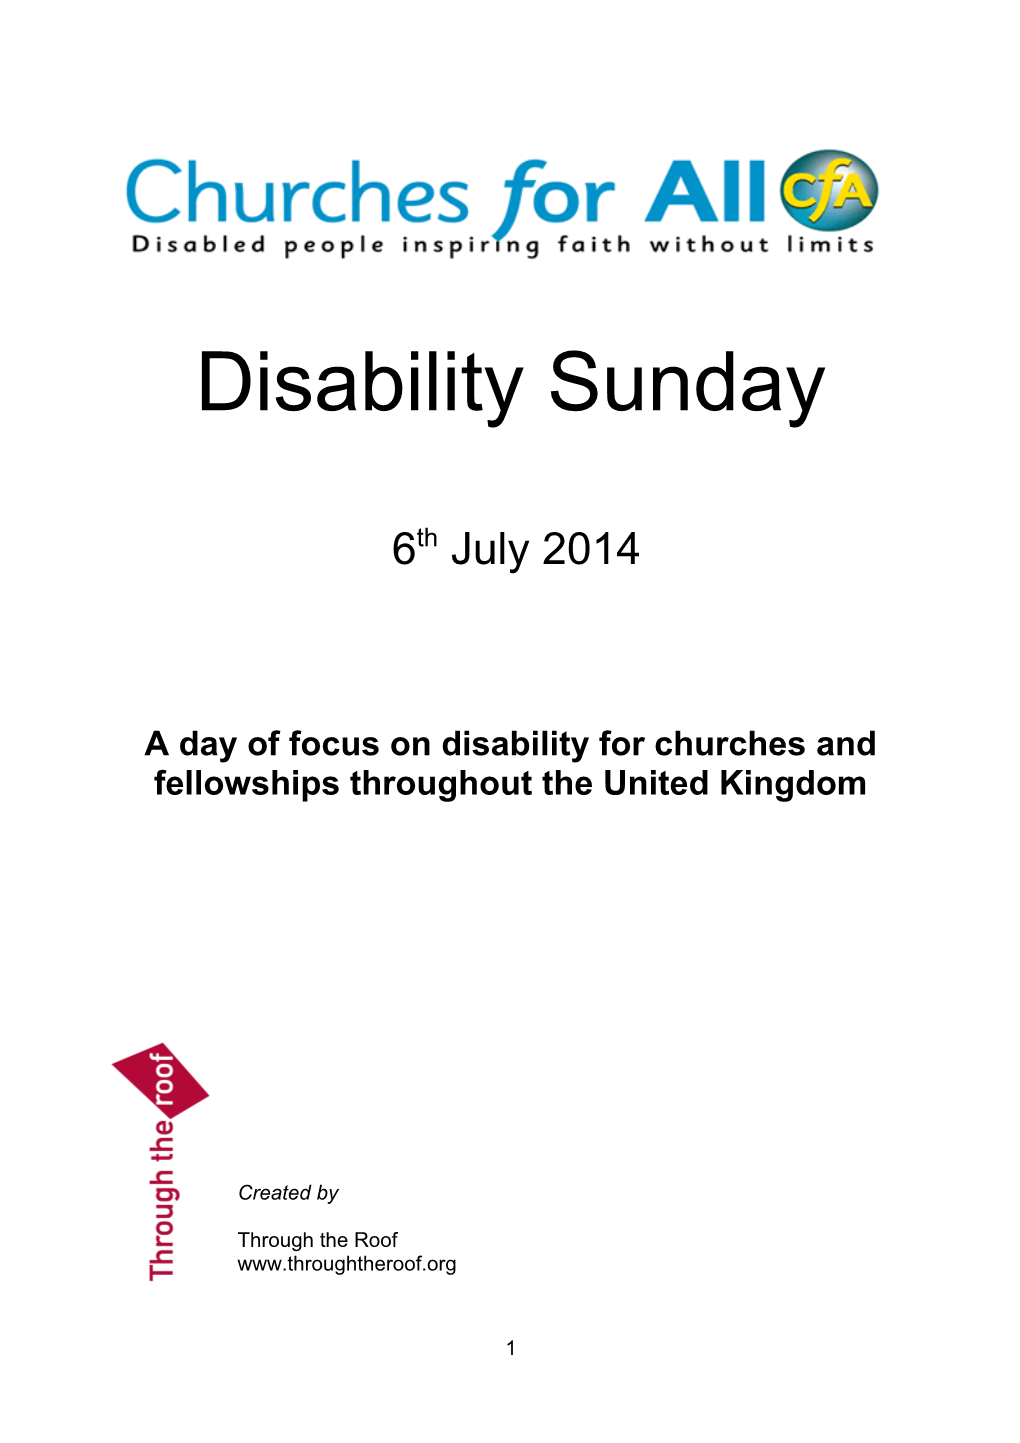 A Day of Focus on Disability for Churches and Fellowships Throughout the United Kingdom